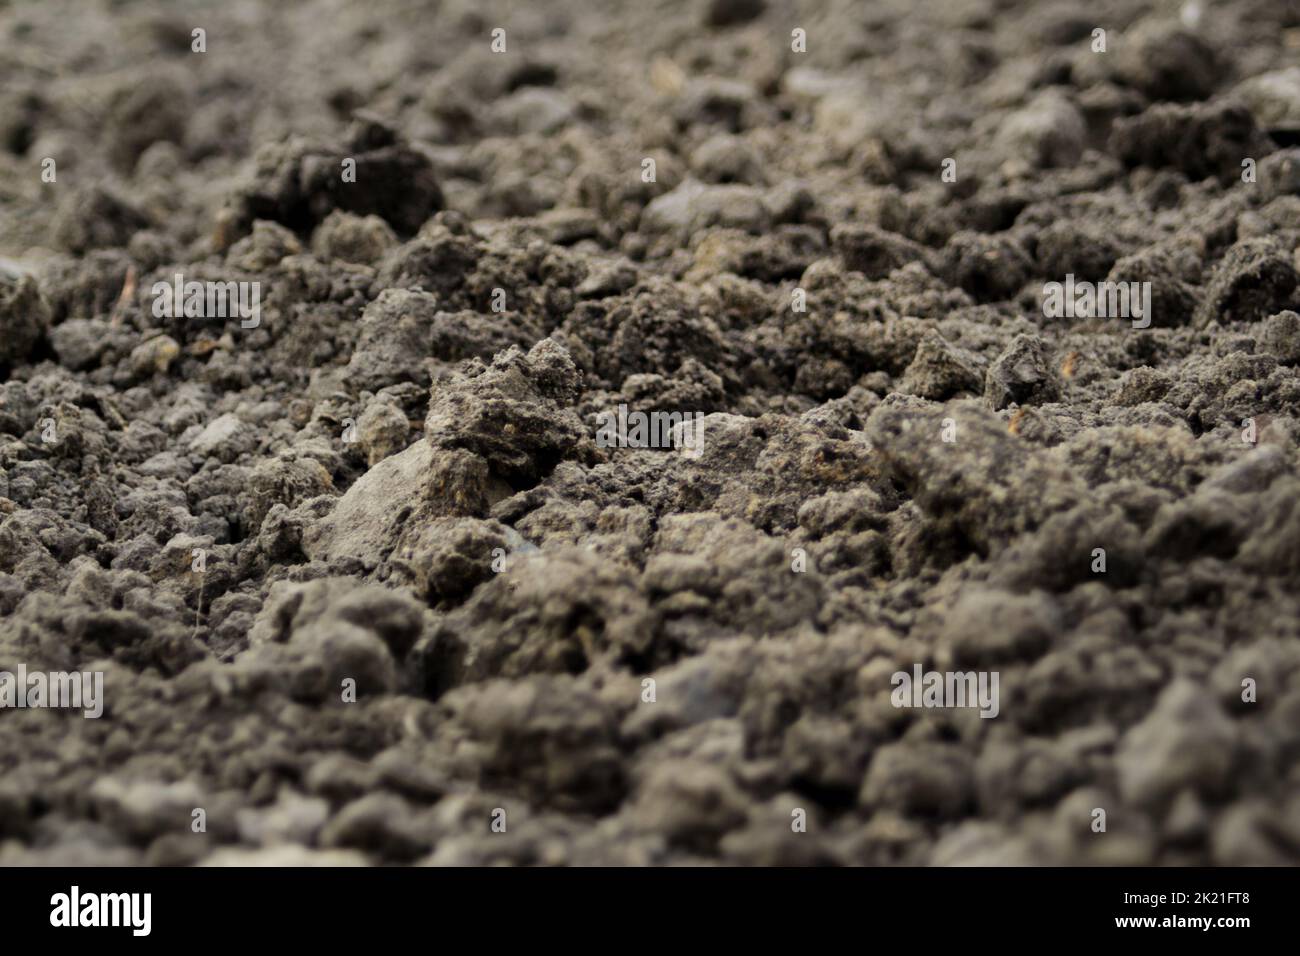 Defocus black land for plant background. Side view. Agriculture concept. Blurred. Out of focus. Stock Photo